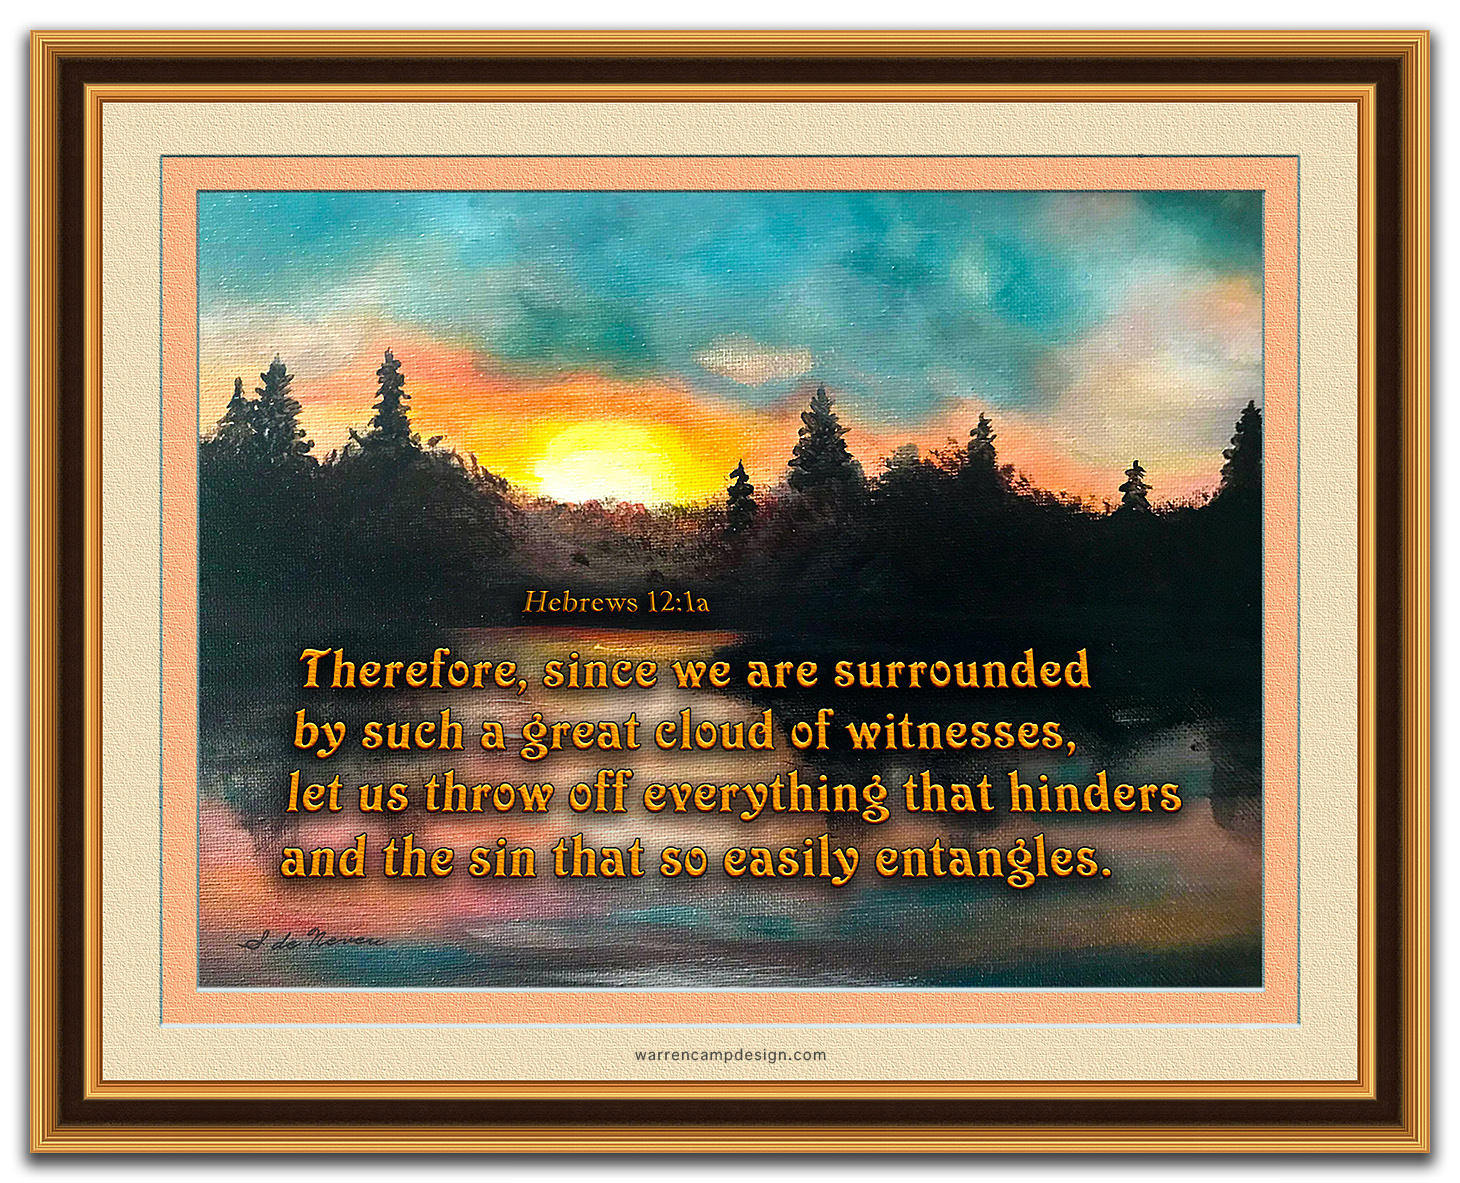 Scripture picture of Hebrews 12:1a, emphasizing the importance of throwing off all that hinders us, especially our sin